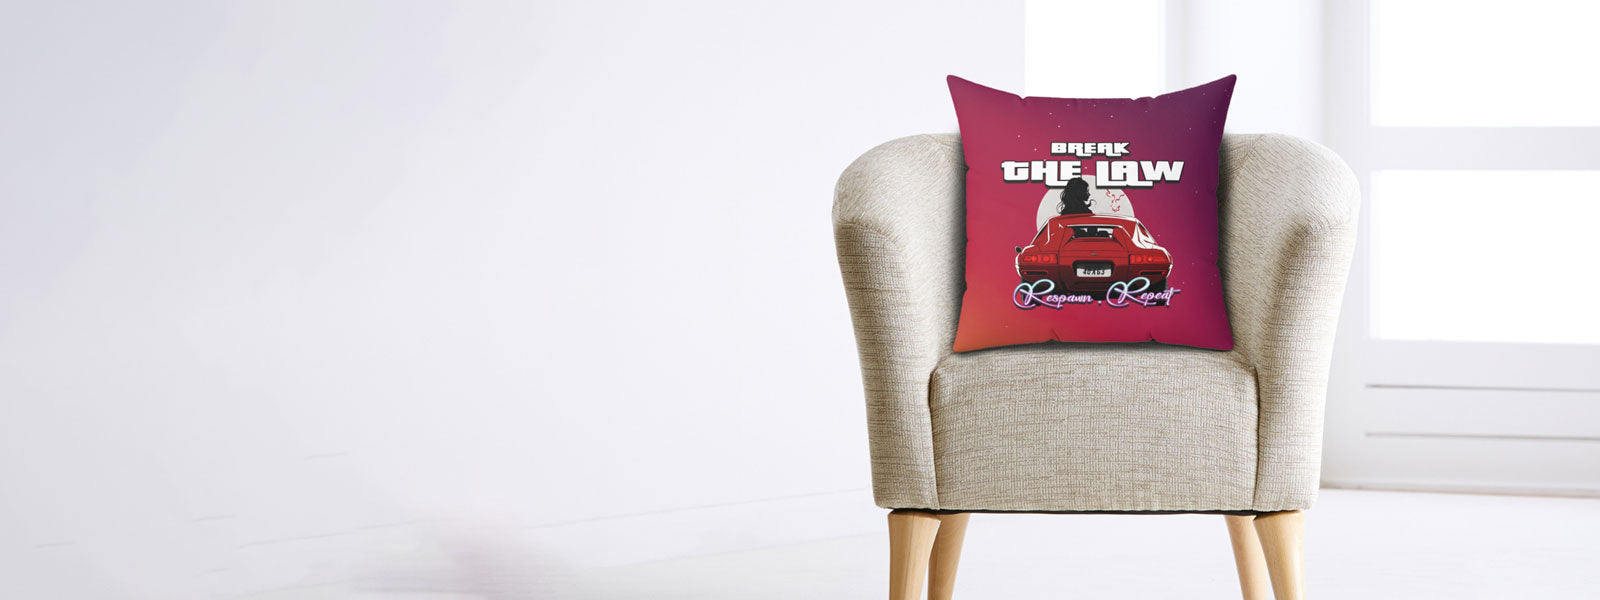 GTA Inspired pillow displayed on a chair - Gamerstopia Carousel Hero Image 2